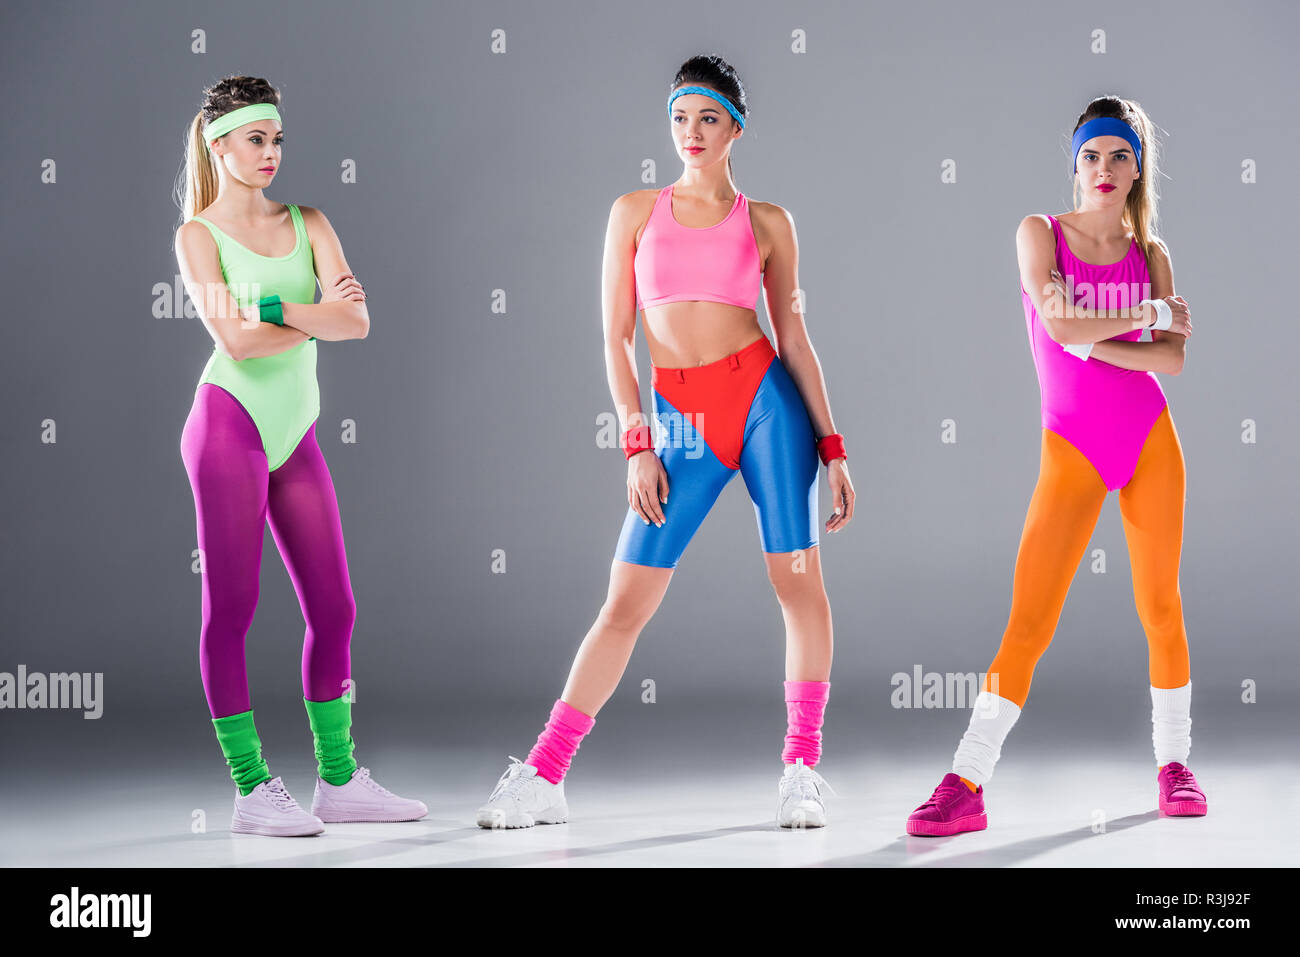 https://c8.alamy.com/comp/R3J92F/full-length-view-of-athletic-young-women-in-80s-style-sportswear-posing-on-grey-R3J92F.jpg